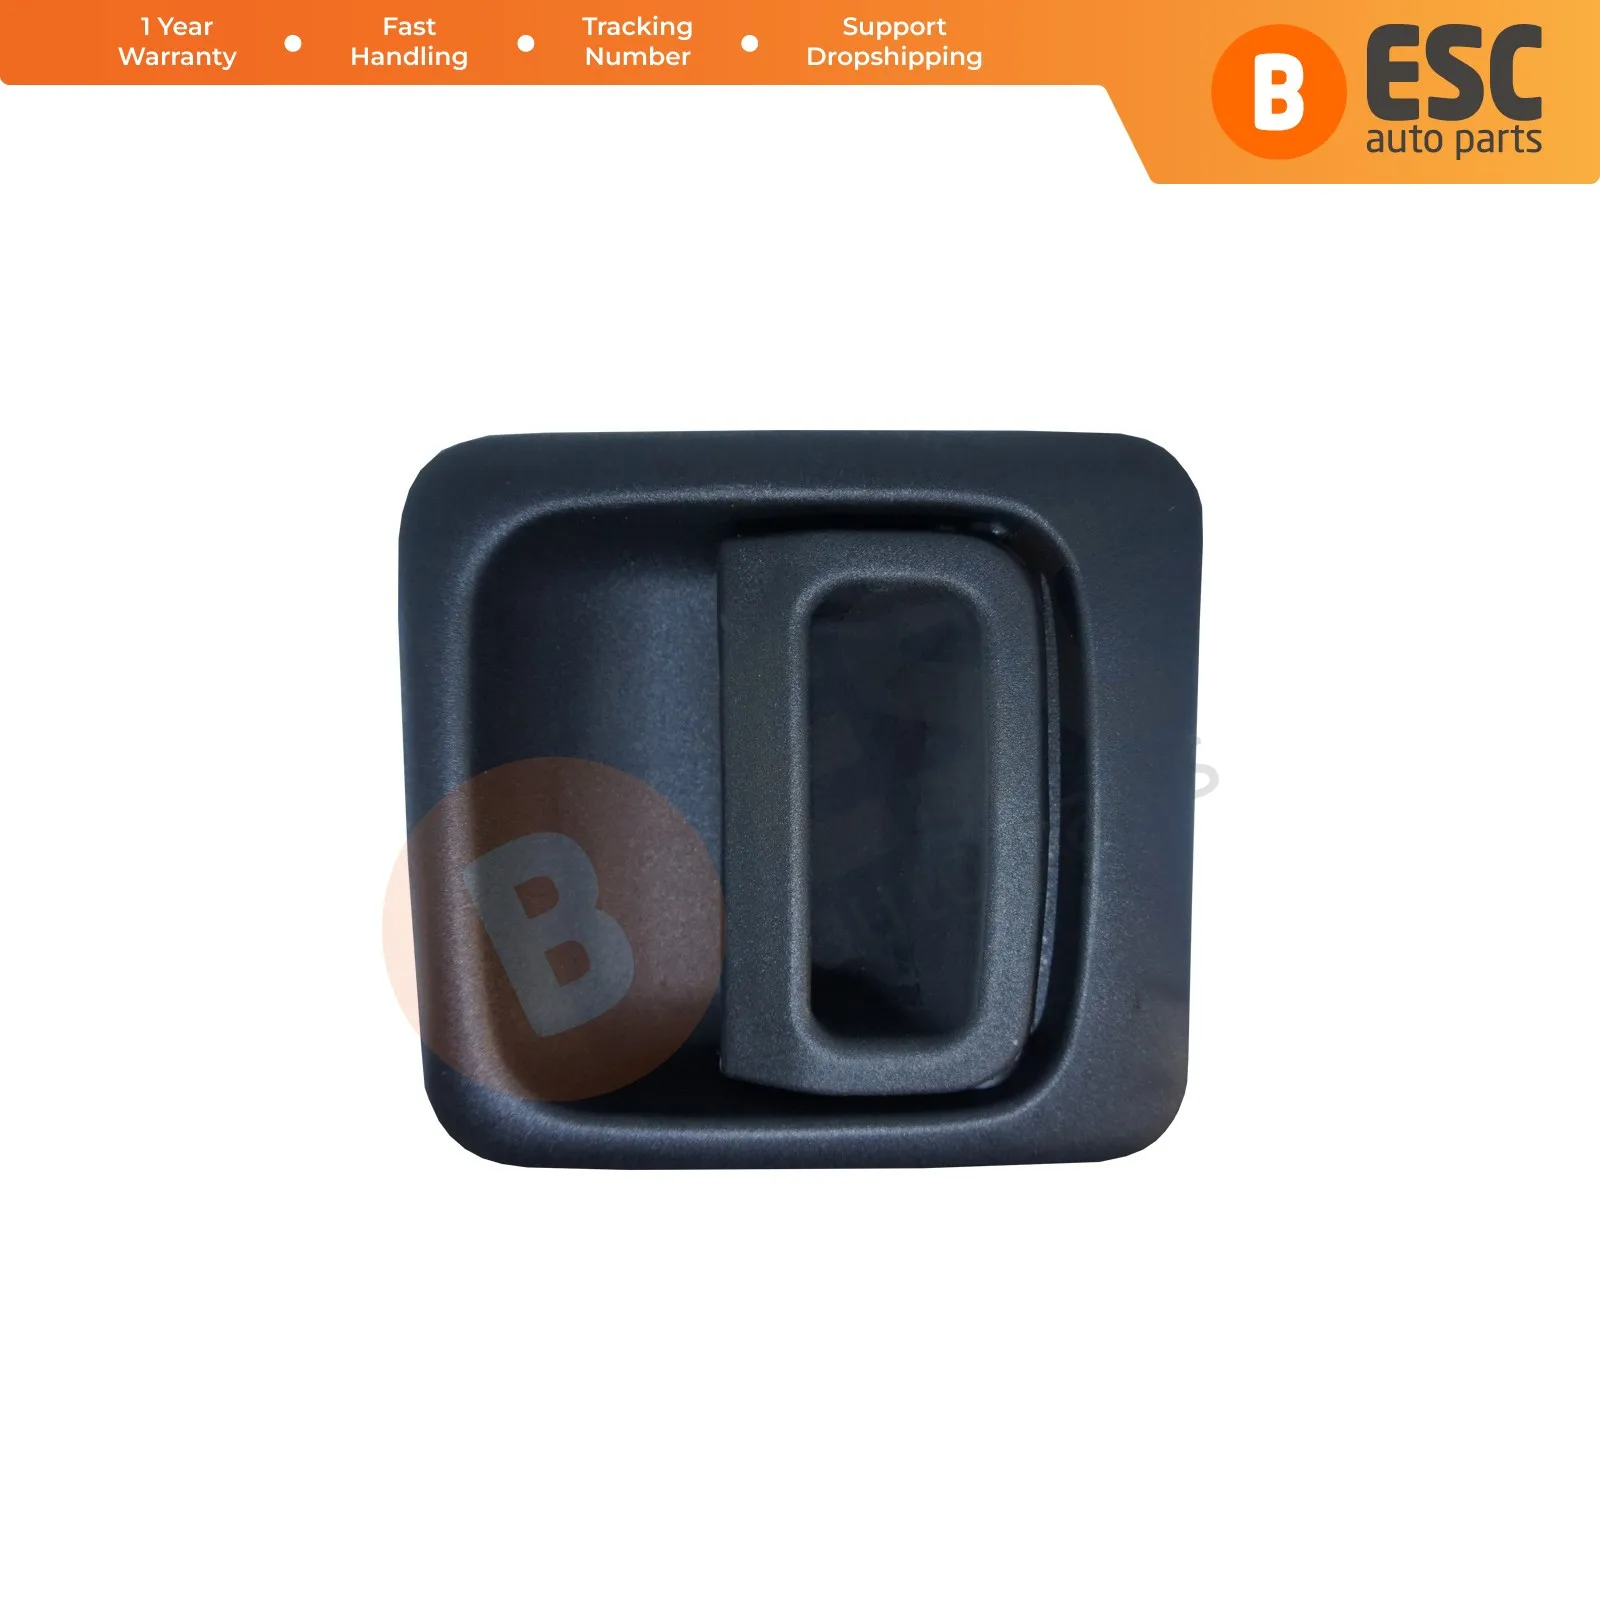 

ESC Auto Parts EDP810 Right Sliding Door Handle 9101T4, 735307399 for Ducato Jumper Relay Boxer Fast Shipment Ship From Turkey